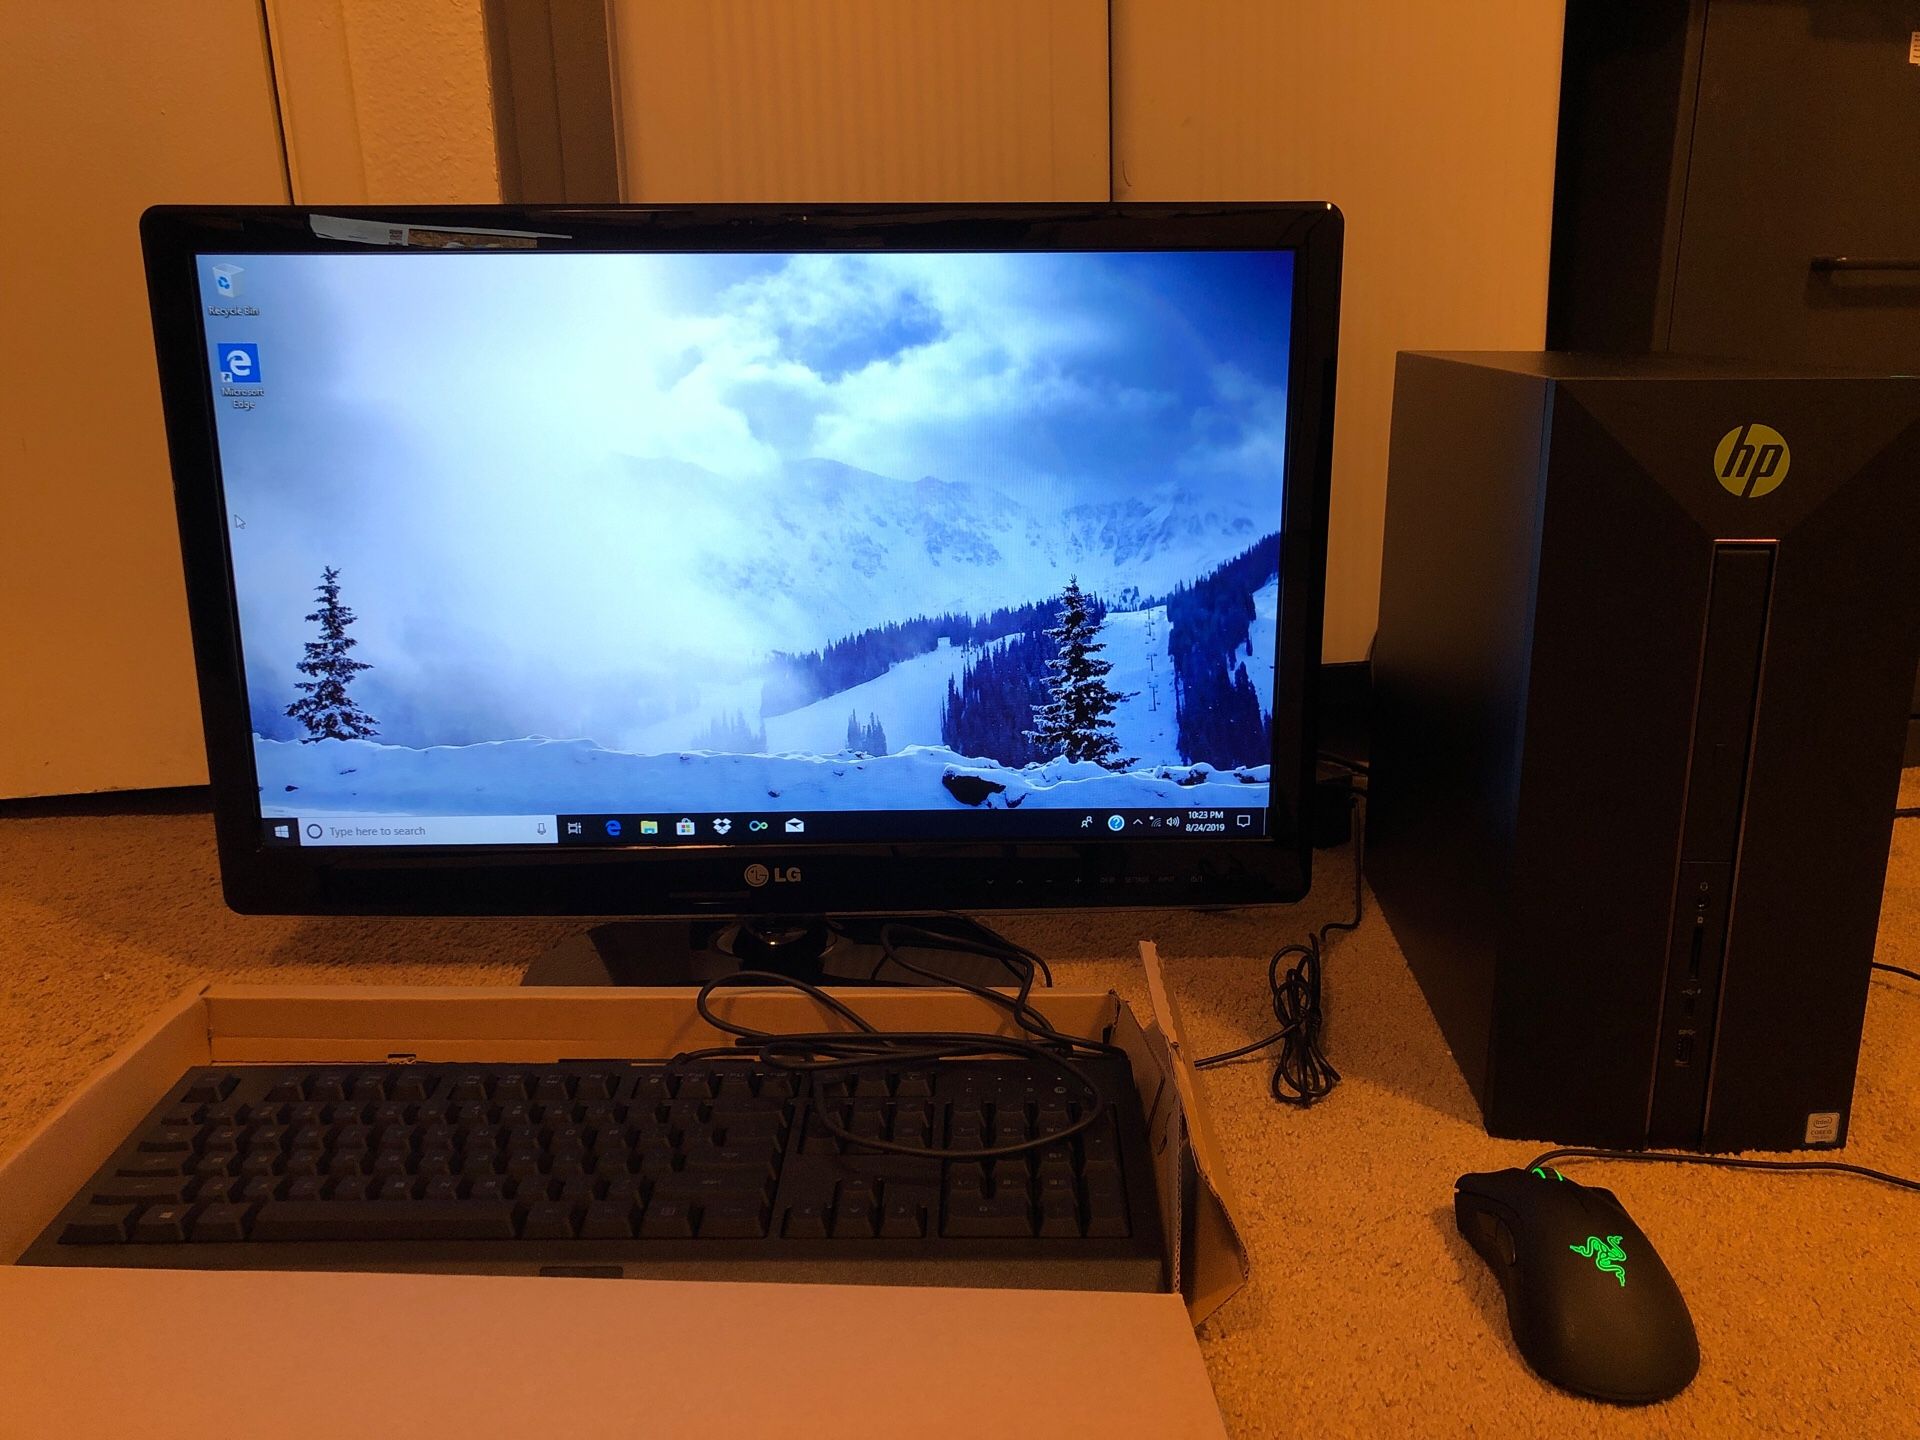 Amazing HP PAVILION GAMING COMPUTER with 32inch LG TV/Monitor and other accessories